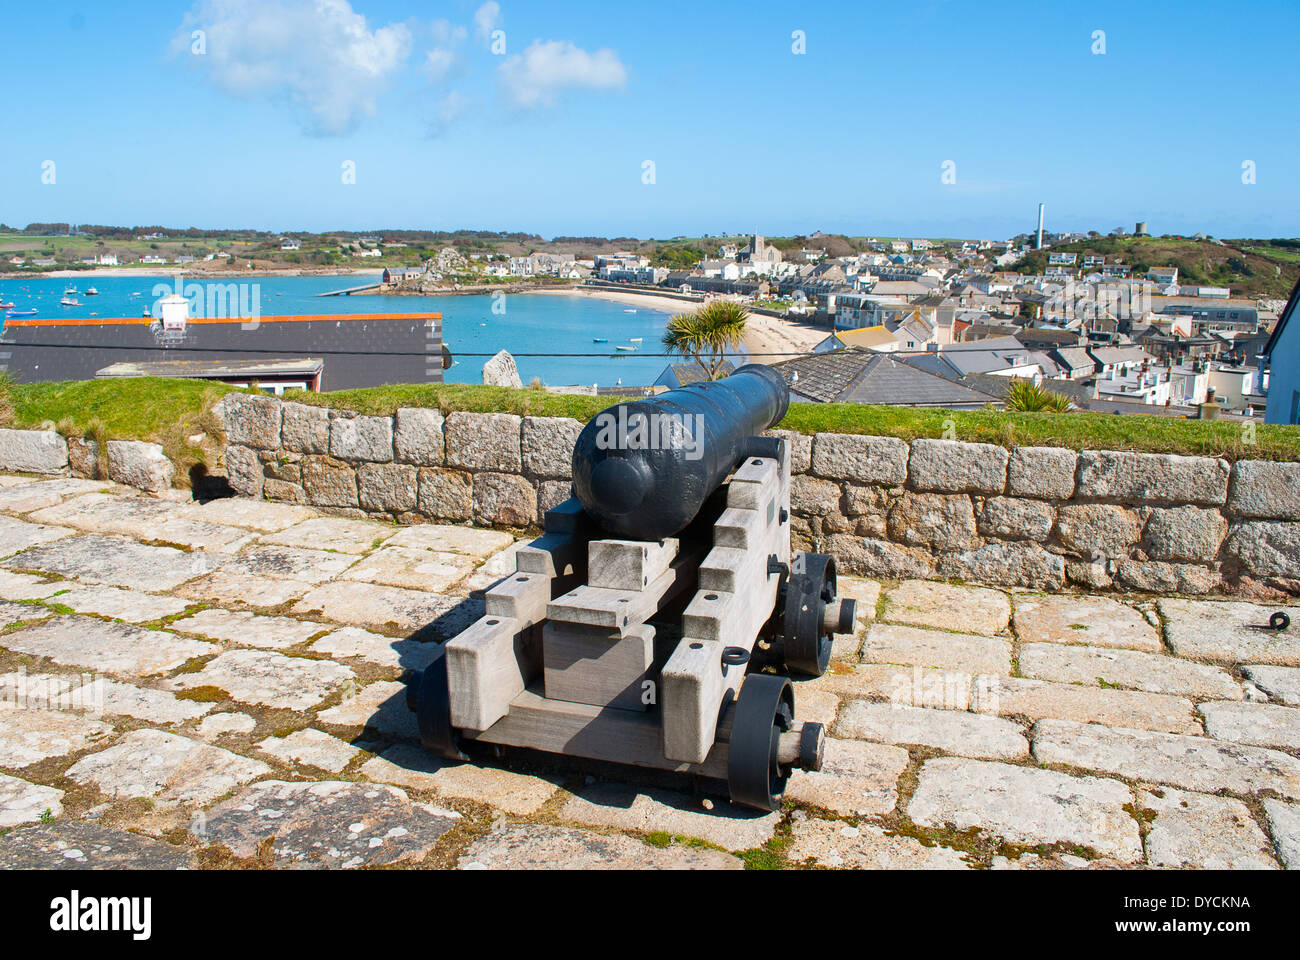 A historical canon situated in St Mary's harbour, on the Isles of Scilly. Stock Photo